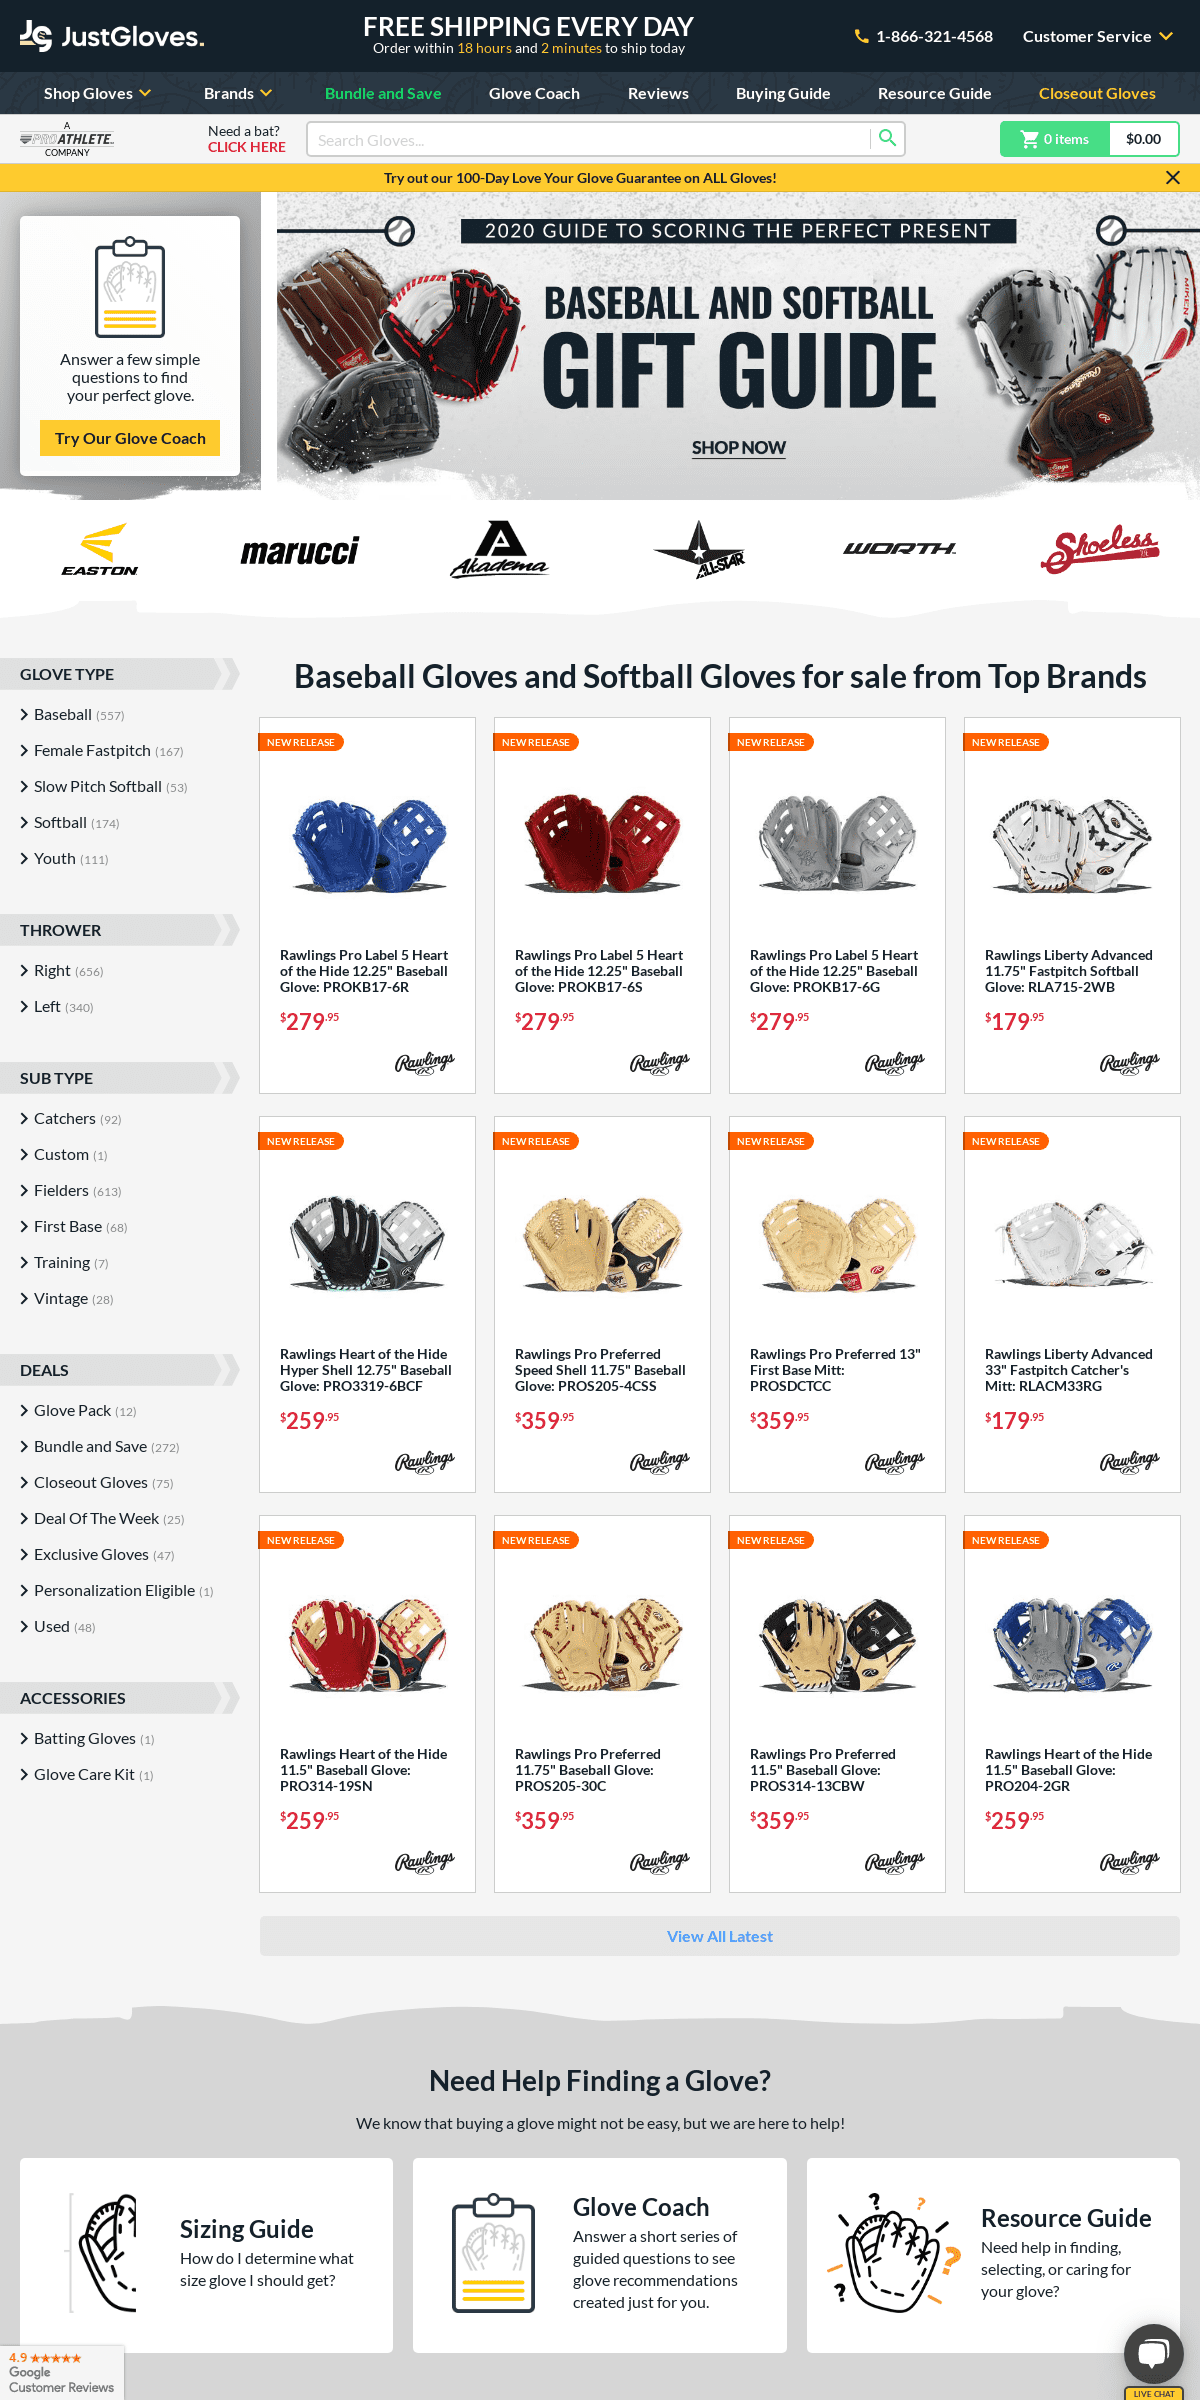 A complete backup of justballgloves.com